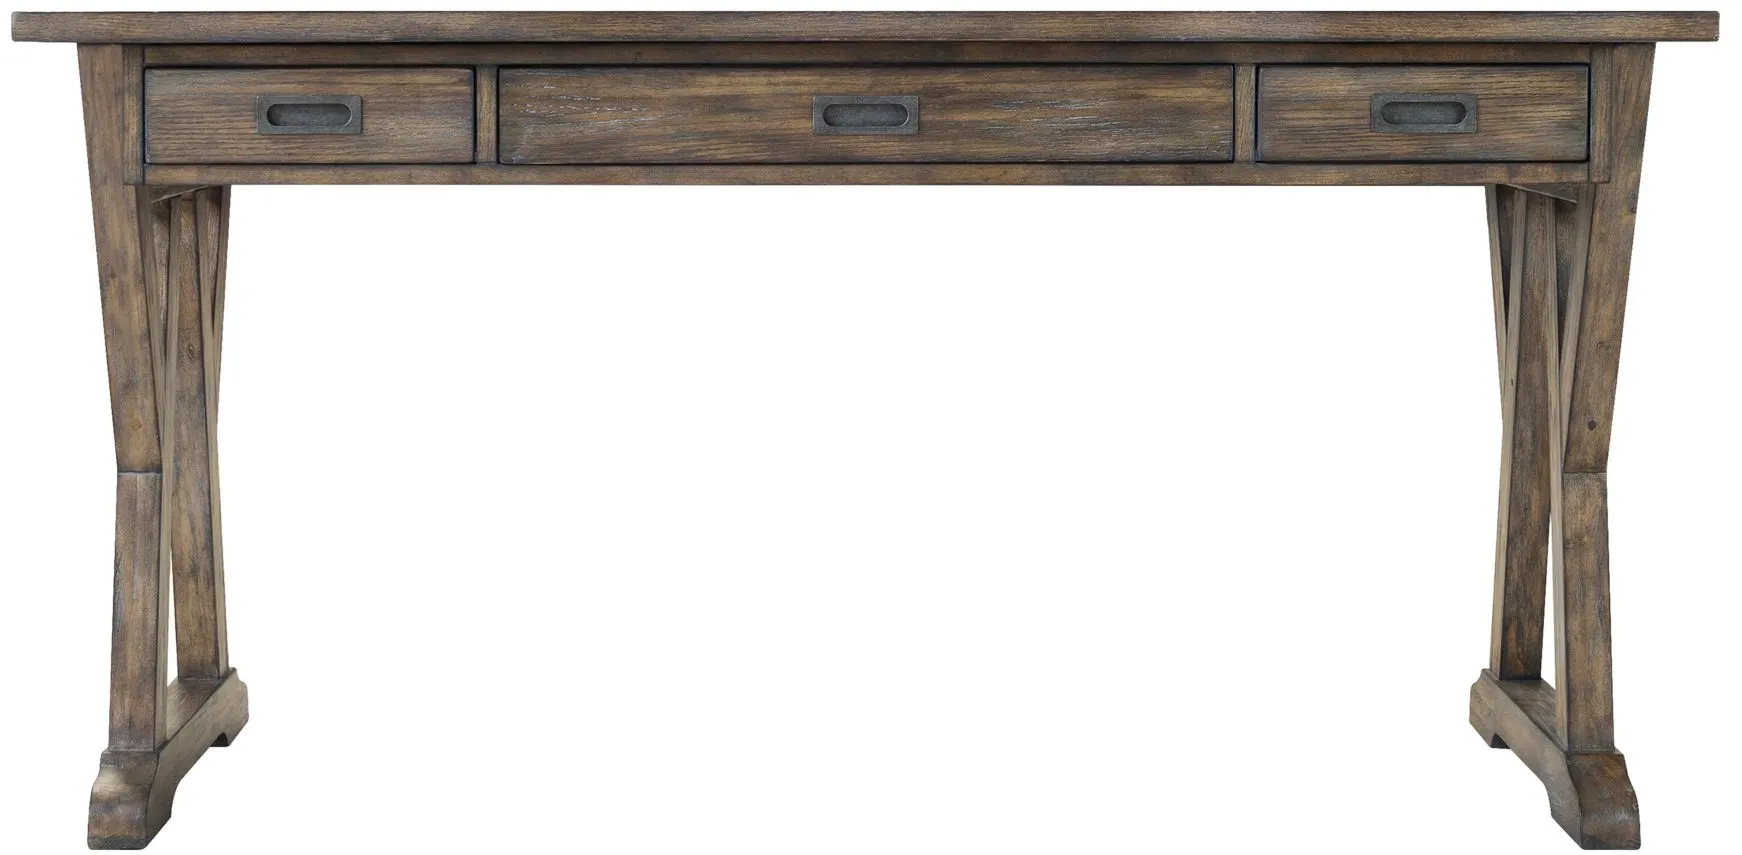 Wyatt Computer Desk in Rustic Saddle by Liberty Furniture